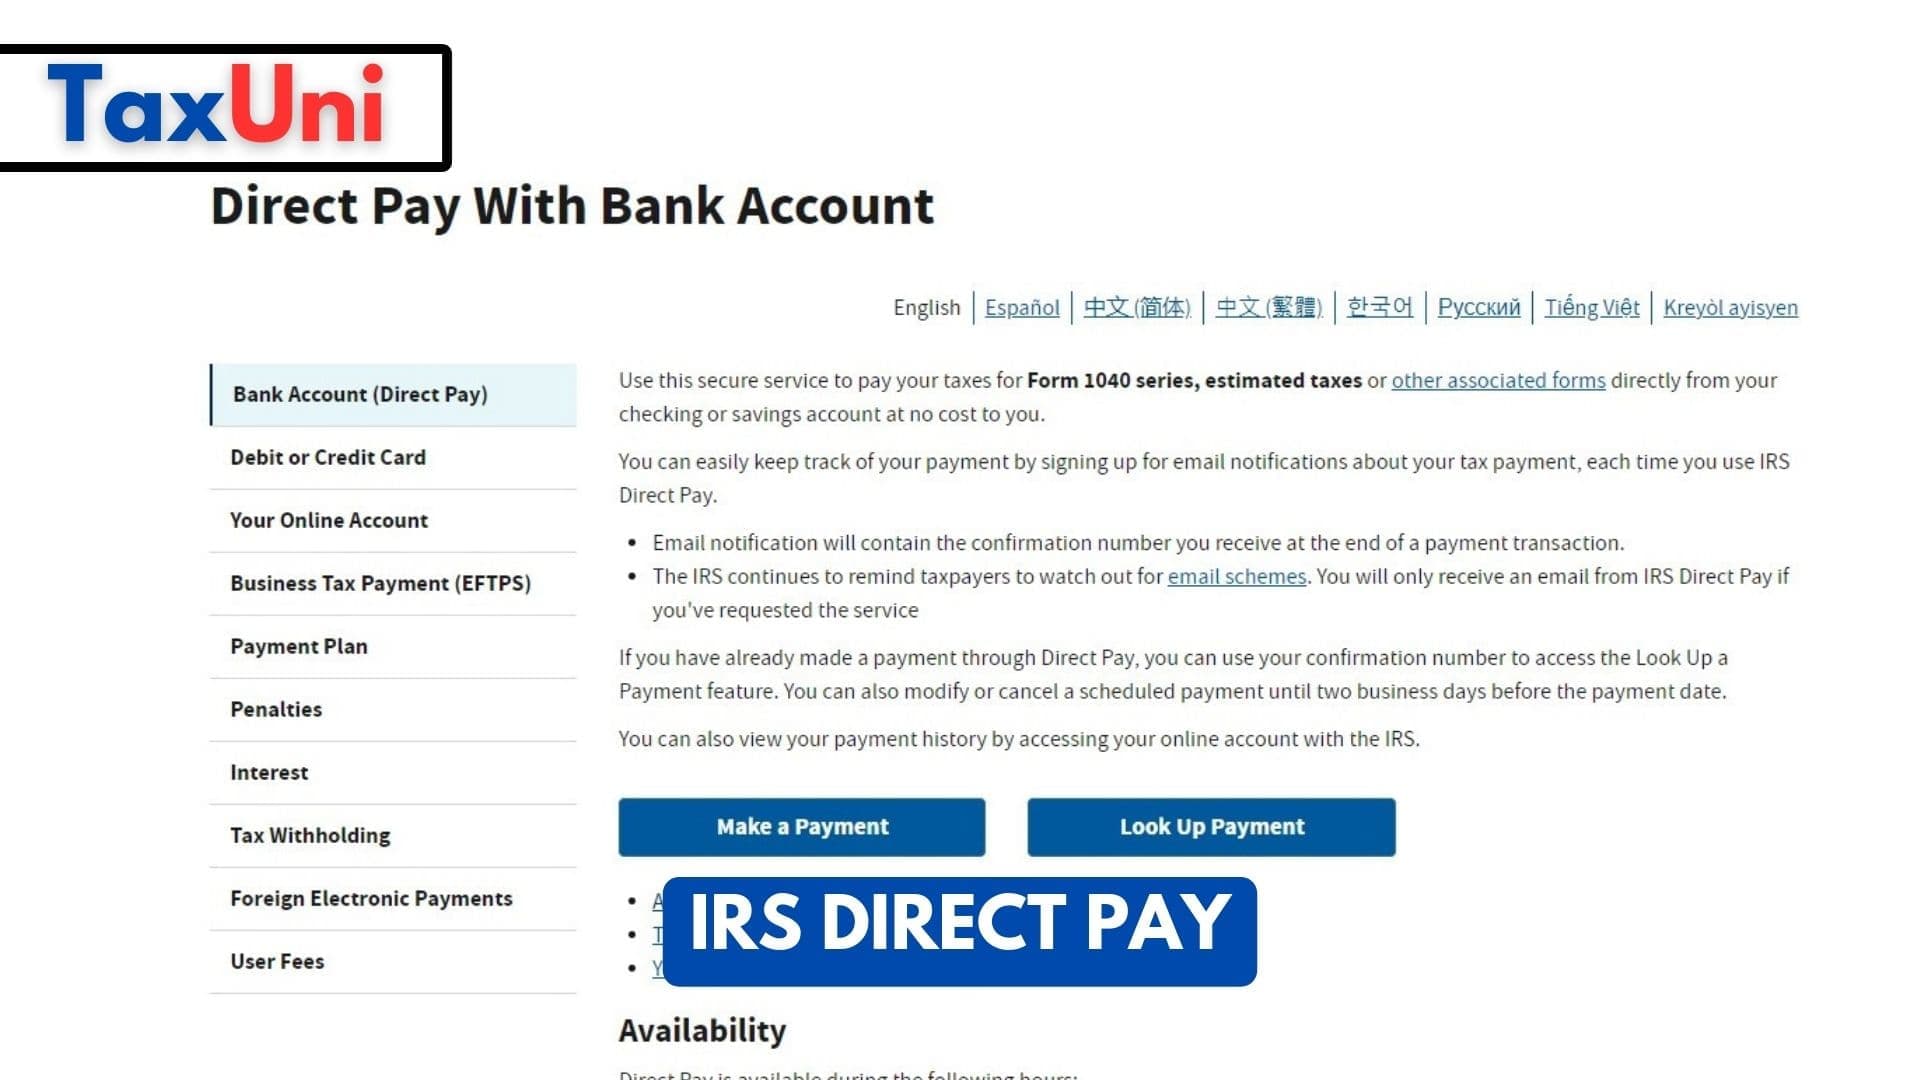 IRS Direct Pay